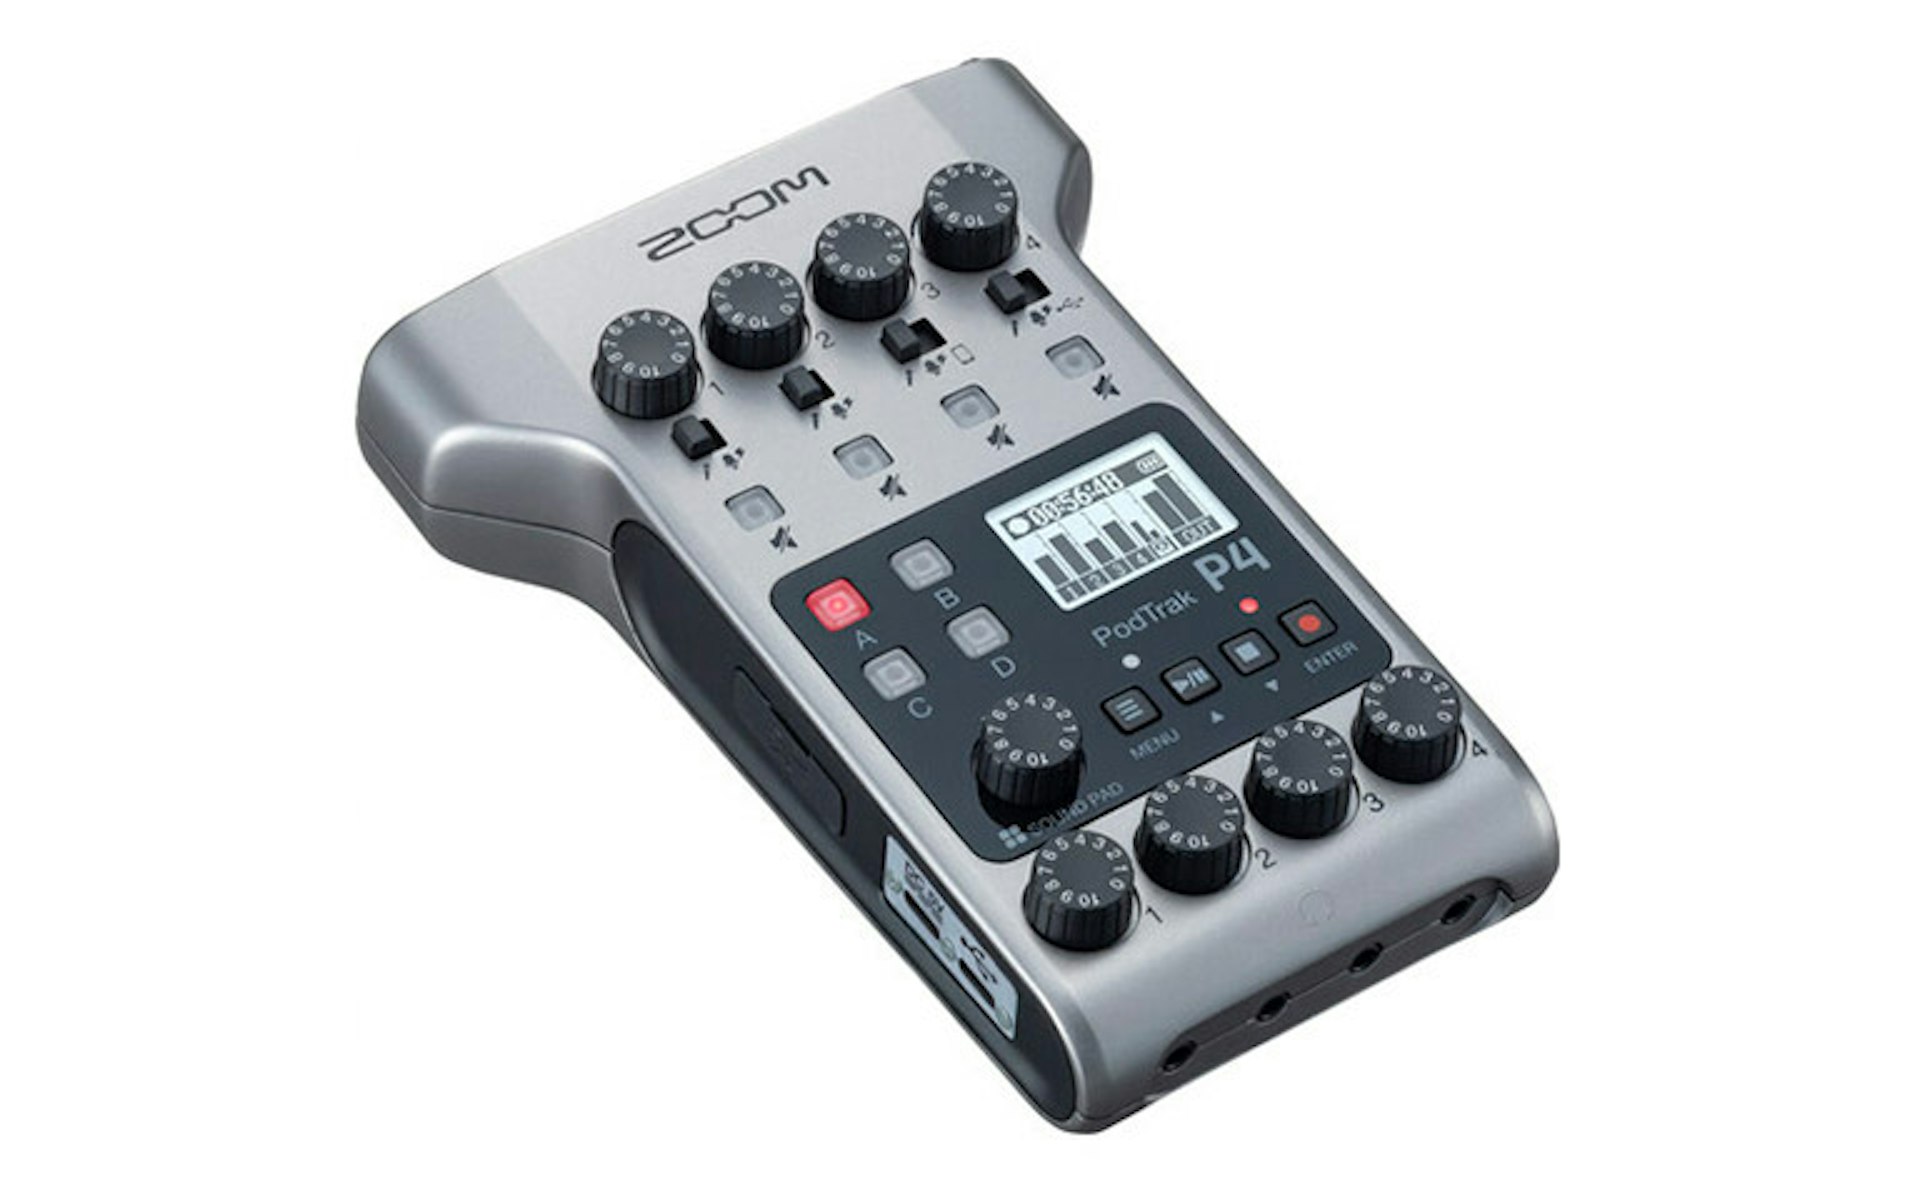 The ZOOM PodTrak P4 is one alternative to the RØDECaster Pro 2.